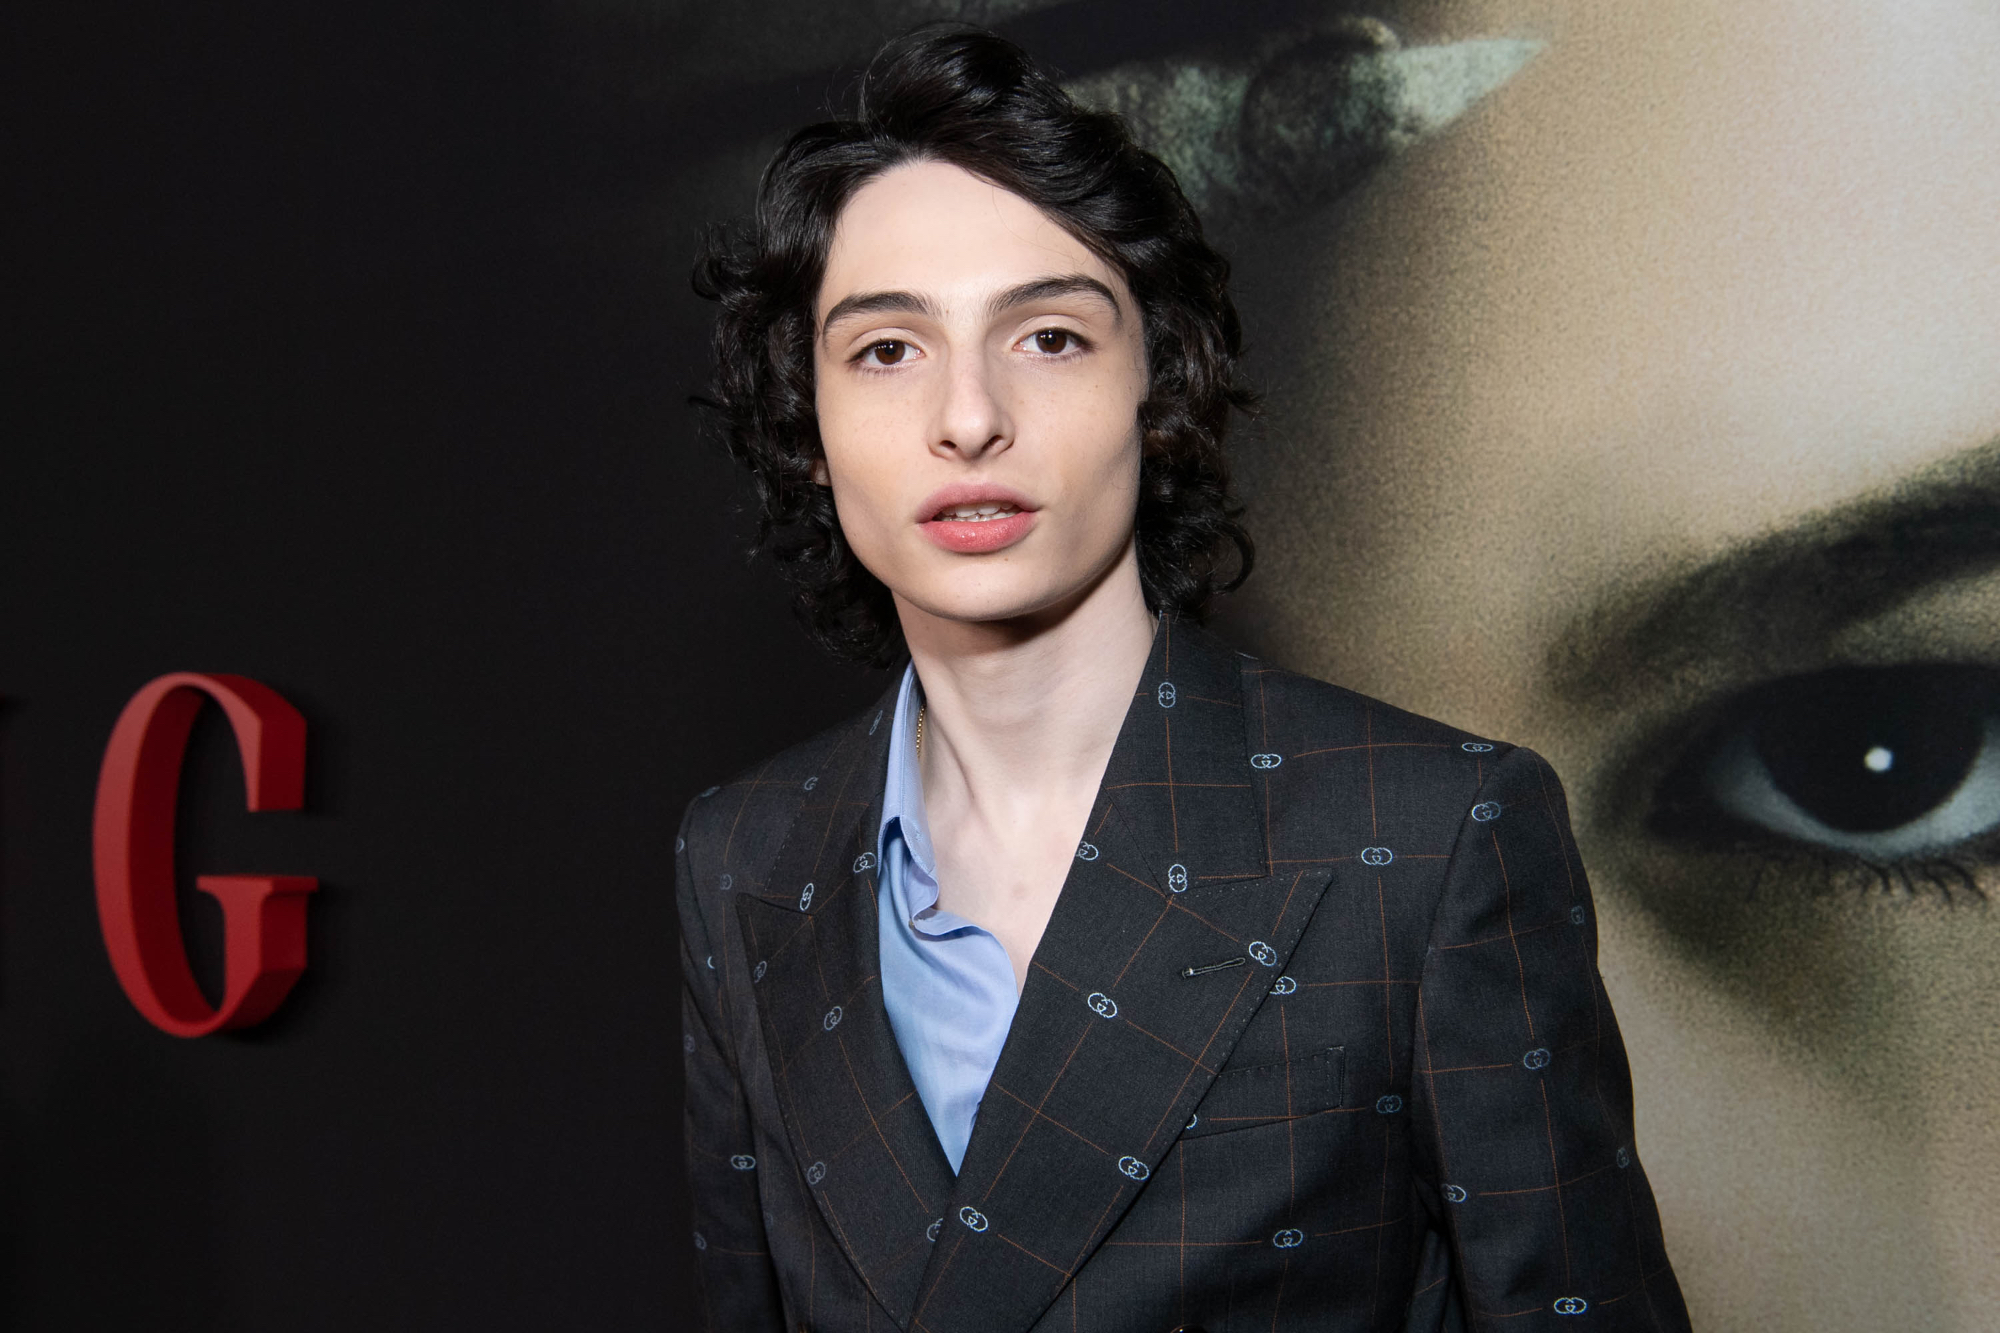 'When You Finish Saving the World' star Finn Wolfhard standing in front of 'The Turning' poster